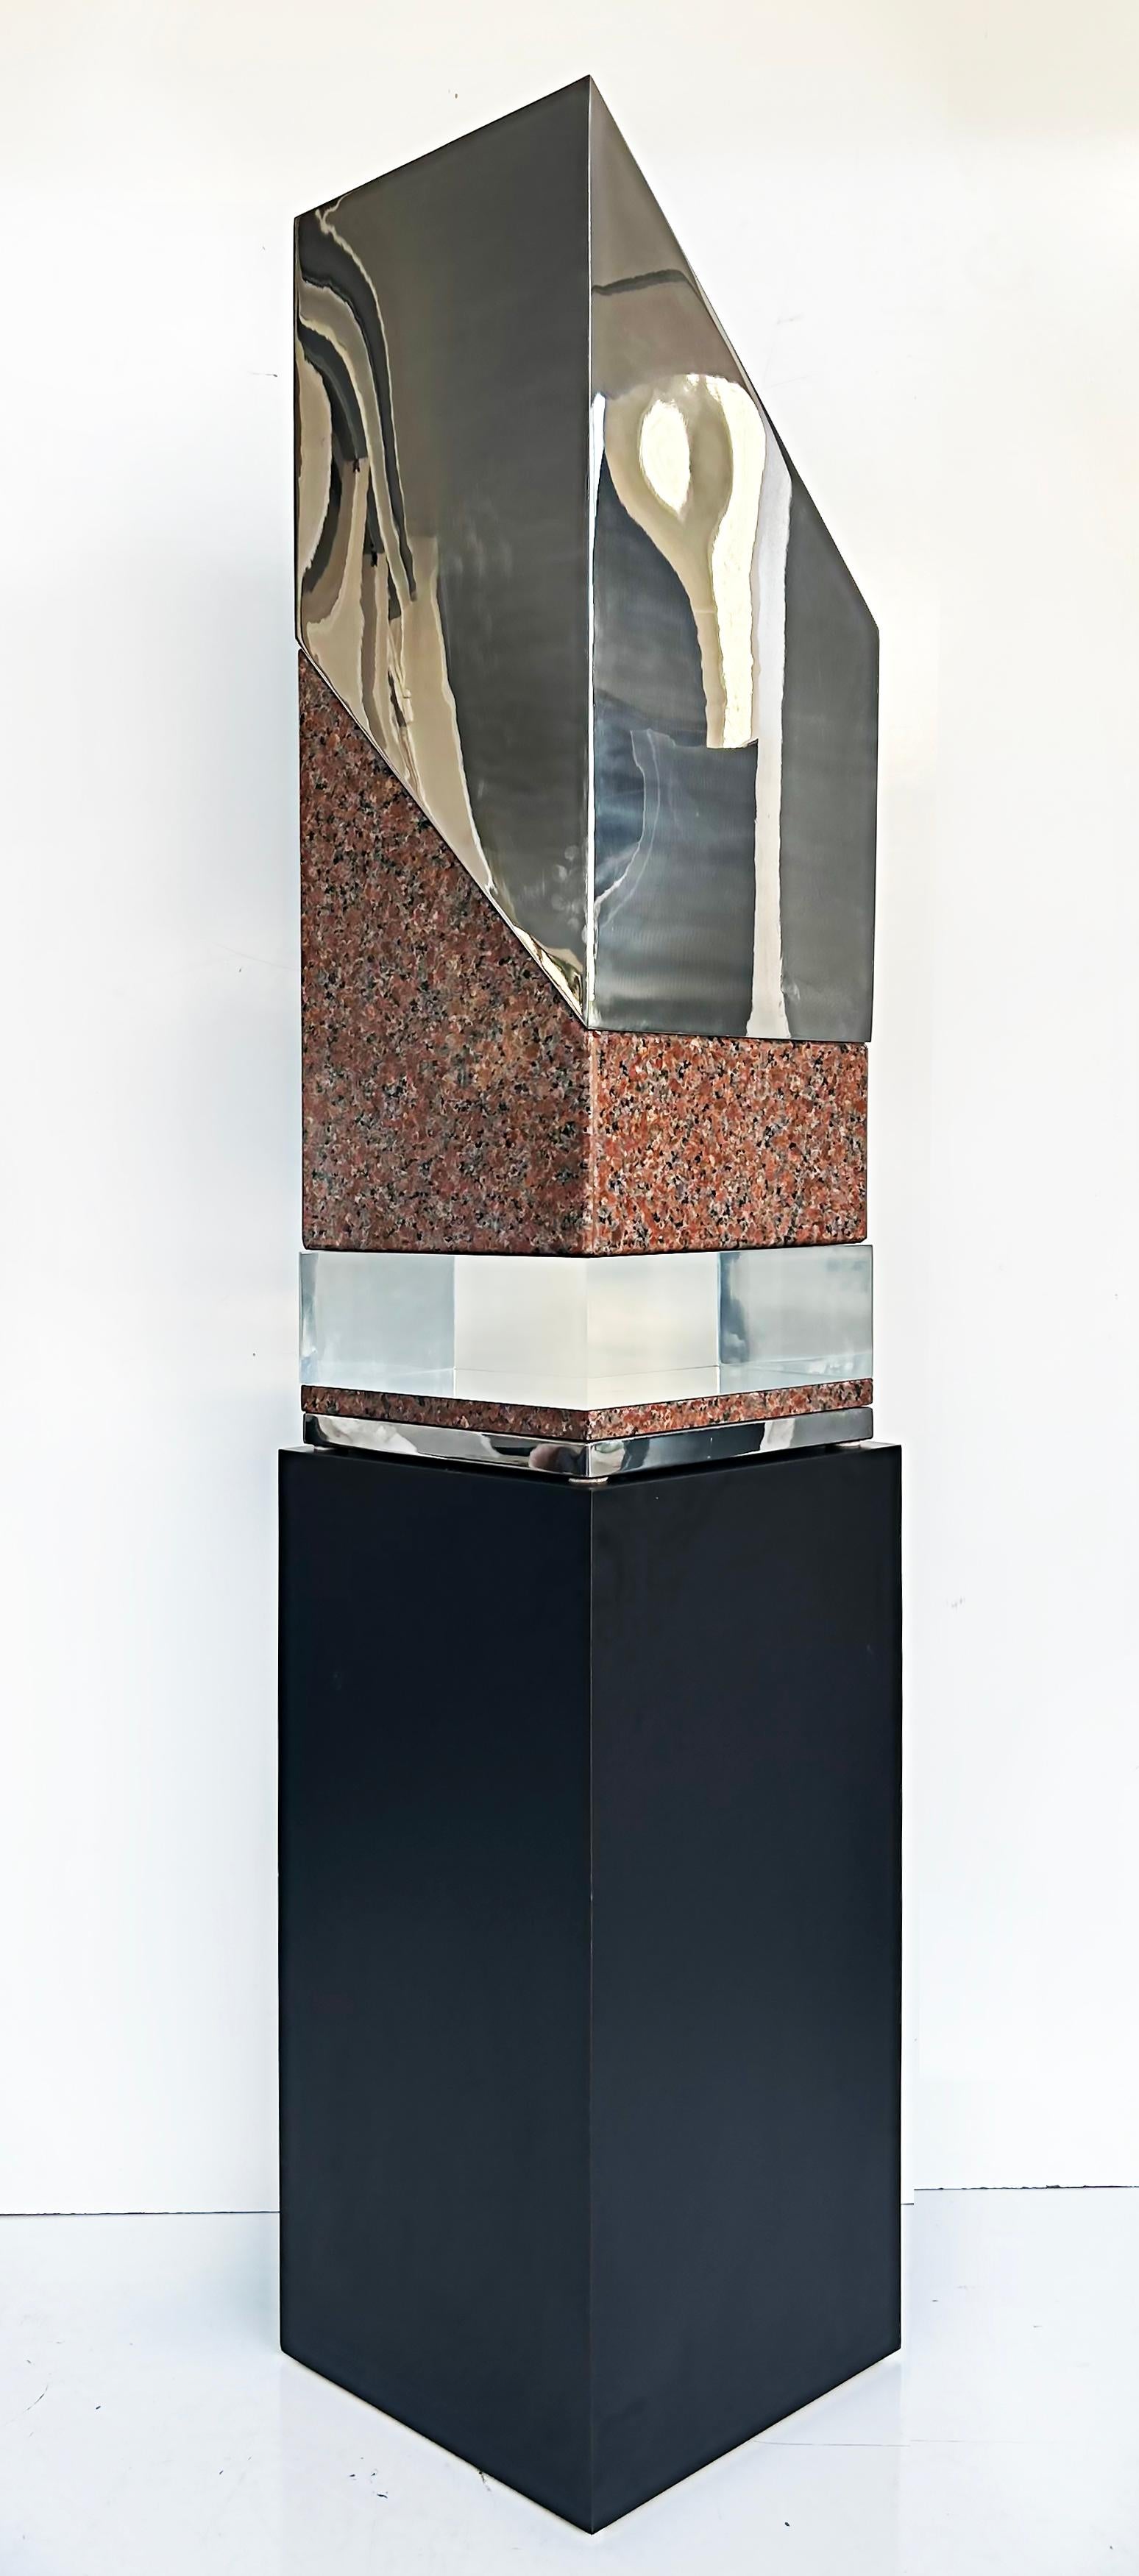 Minimalist Abstract sculpture in stainless steel, granite, Lucite and is Unsigned

Offered for sale is a large minimalist abstract sculpture constructed with stainless steel, granite, and Lucite. The sculpture is mounted on a stainless steel base.